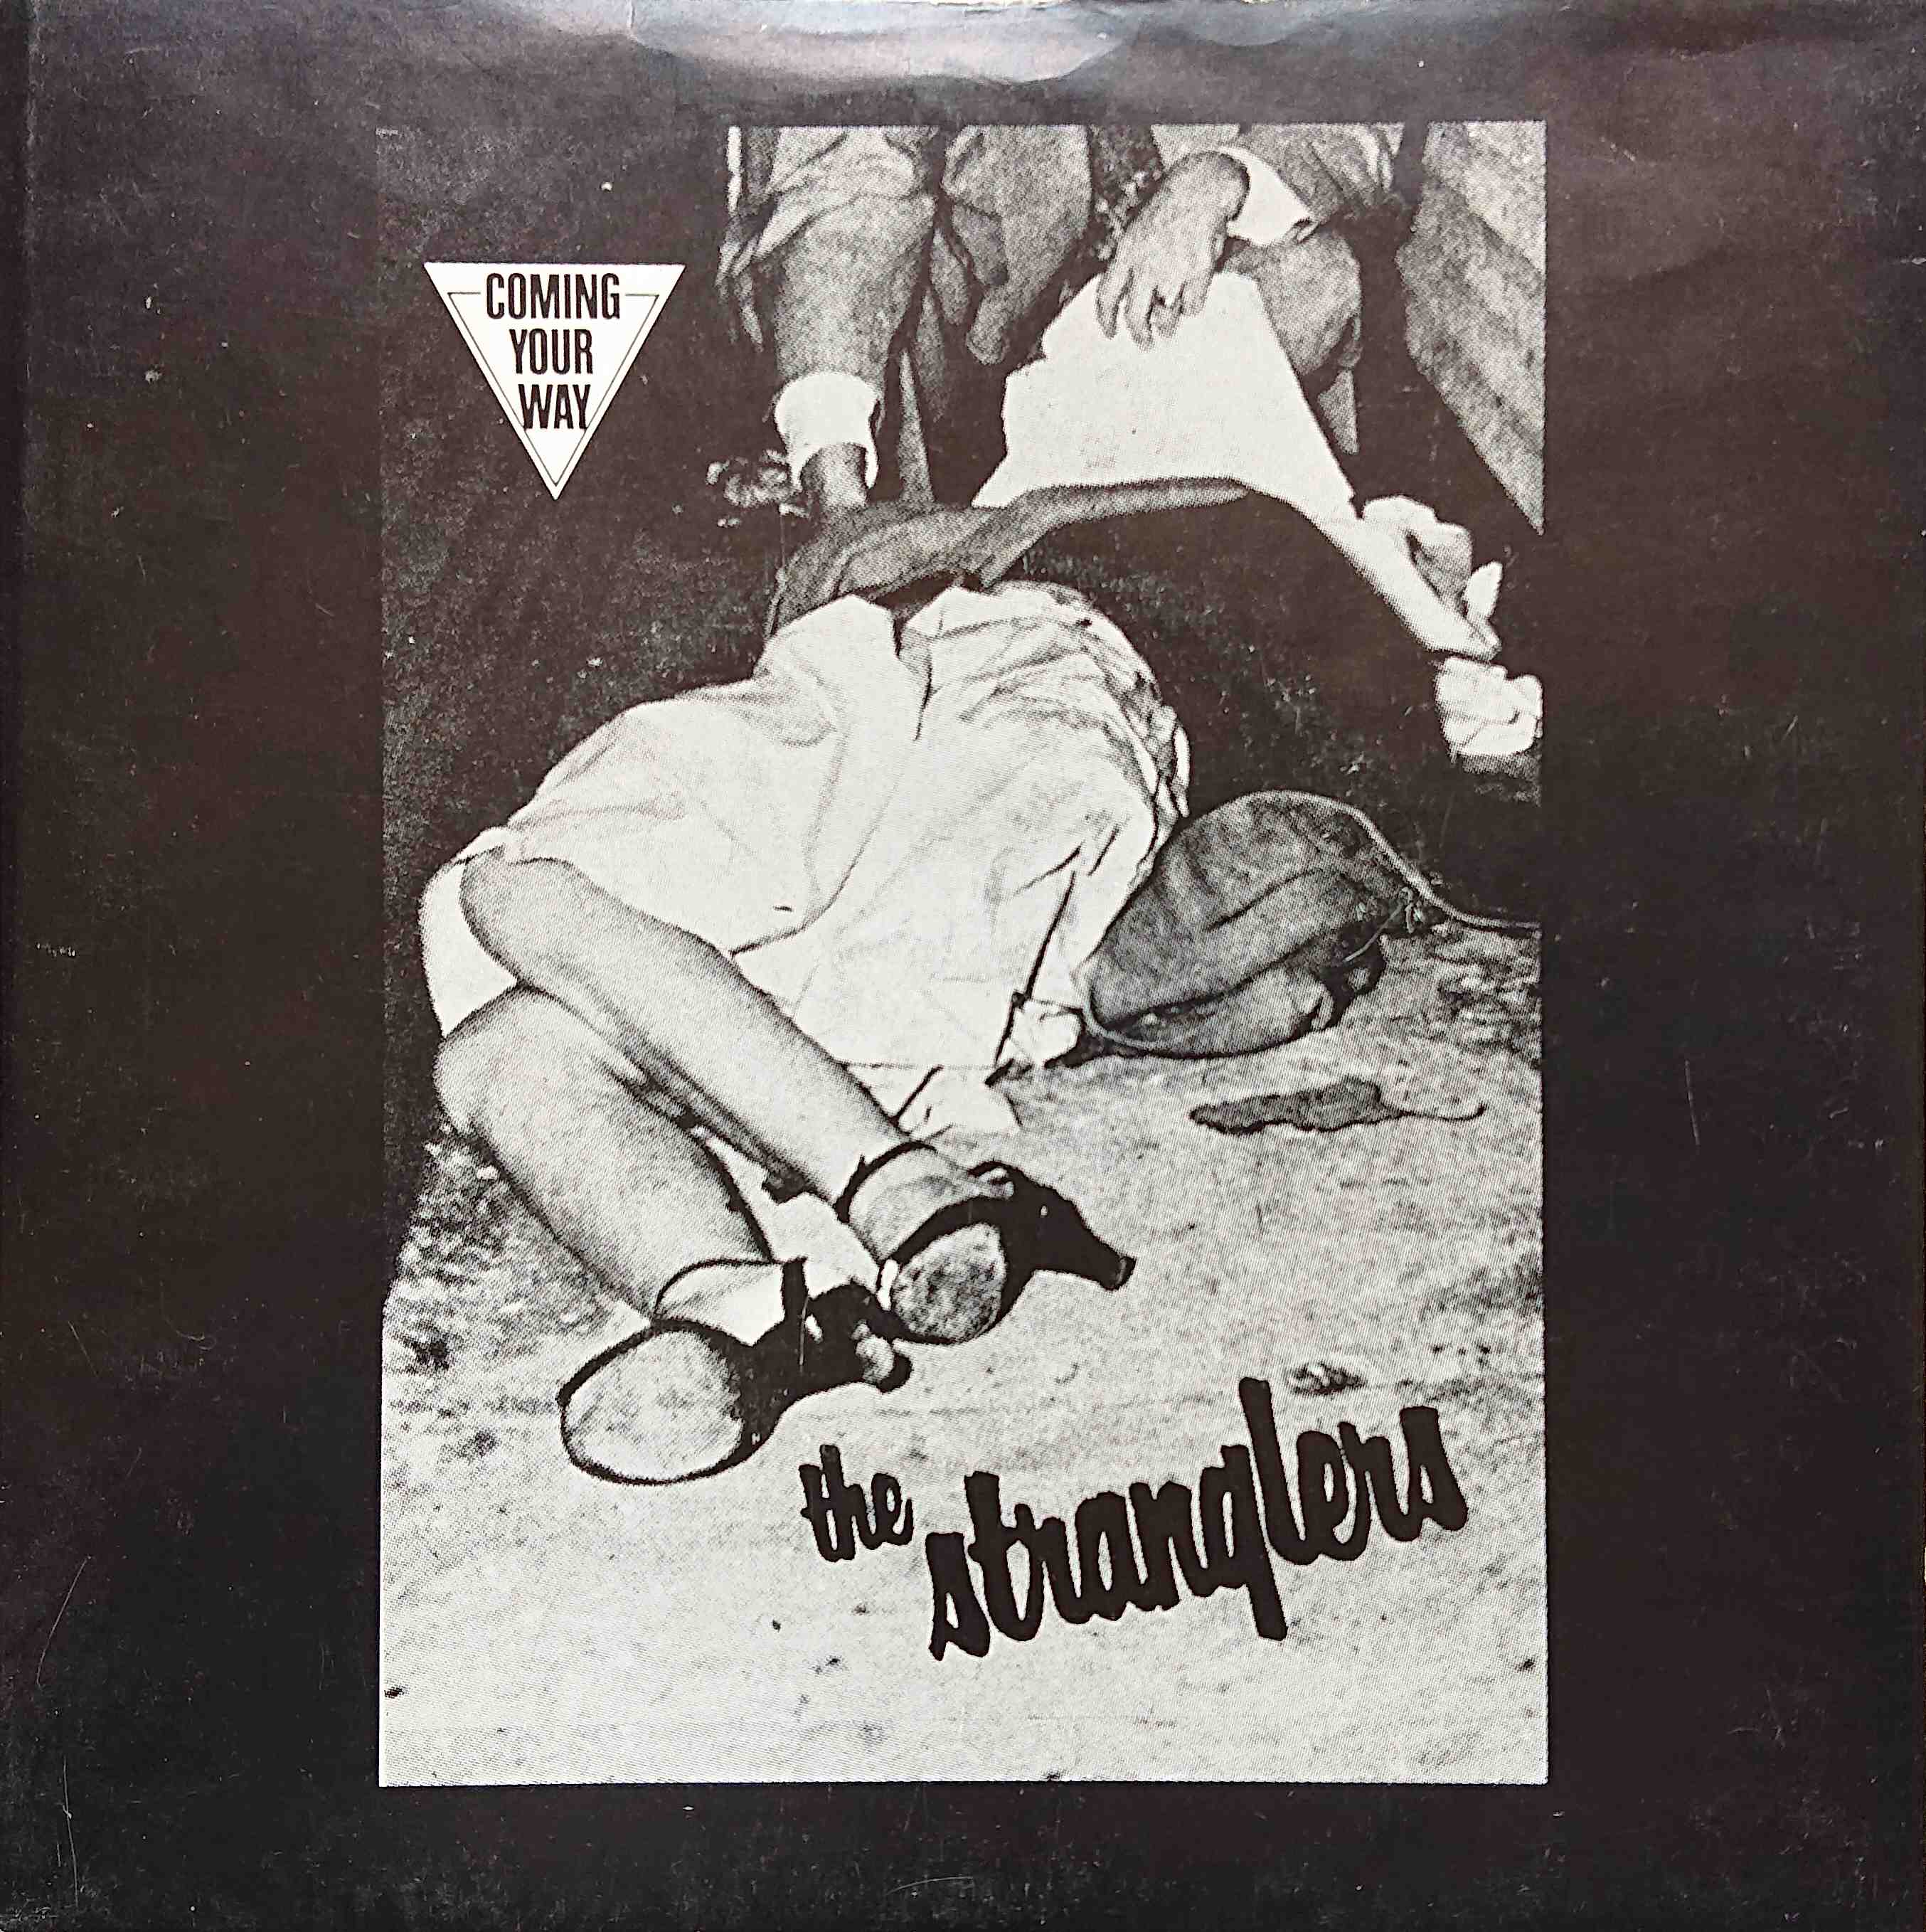 Picture of Nice 'n' sleazy by artist The Stranglers  from The Stranglers singles